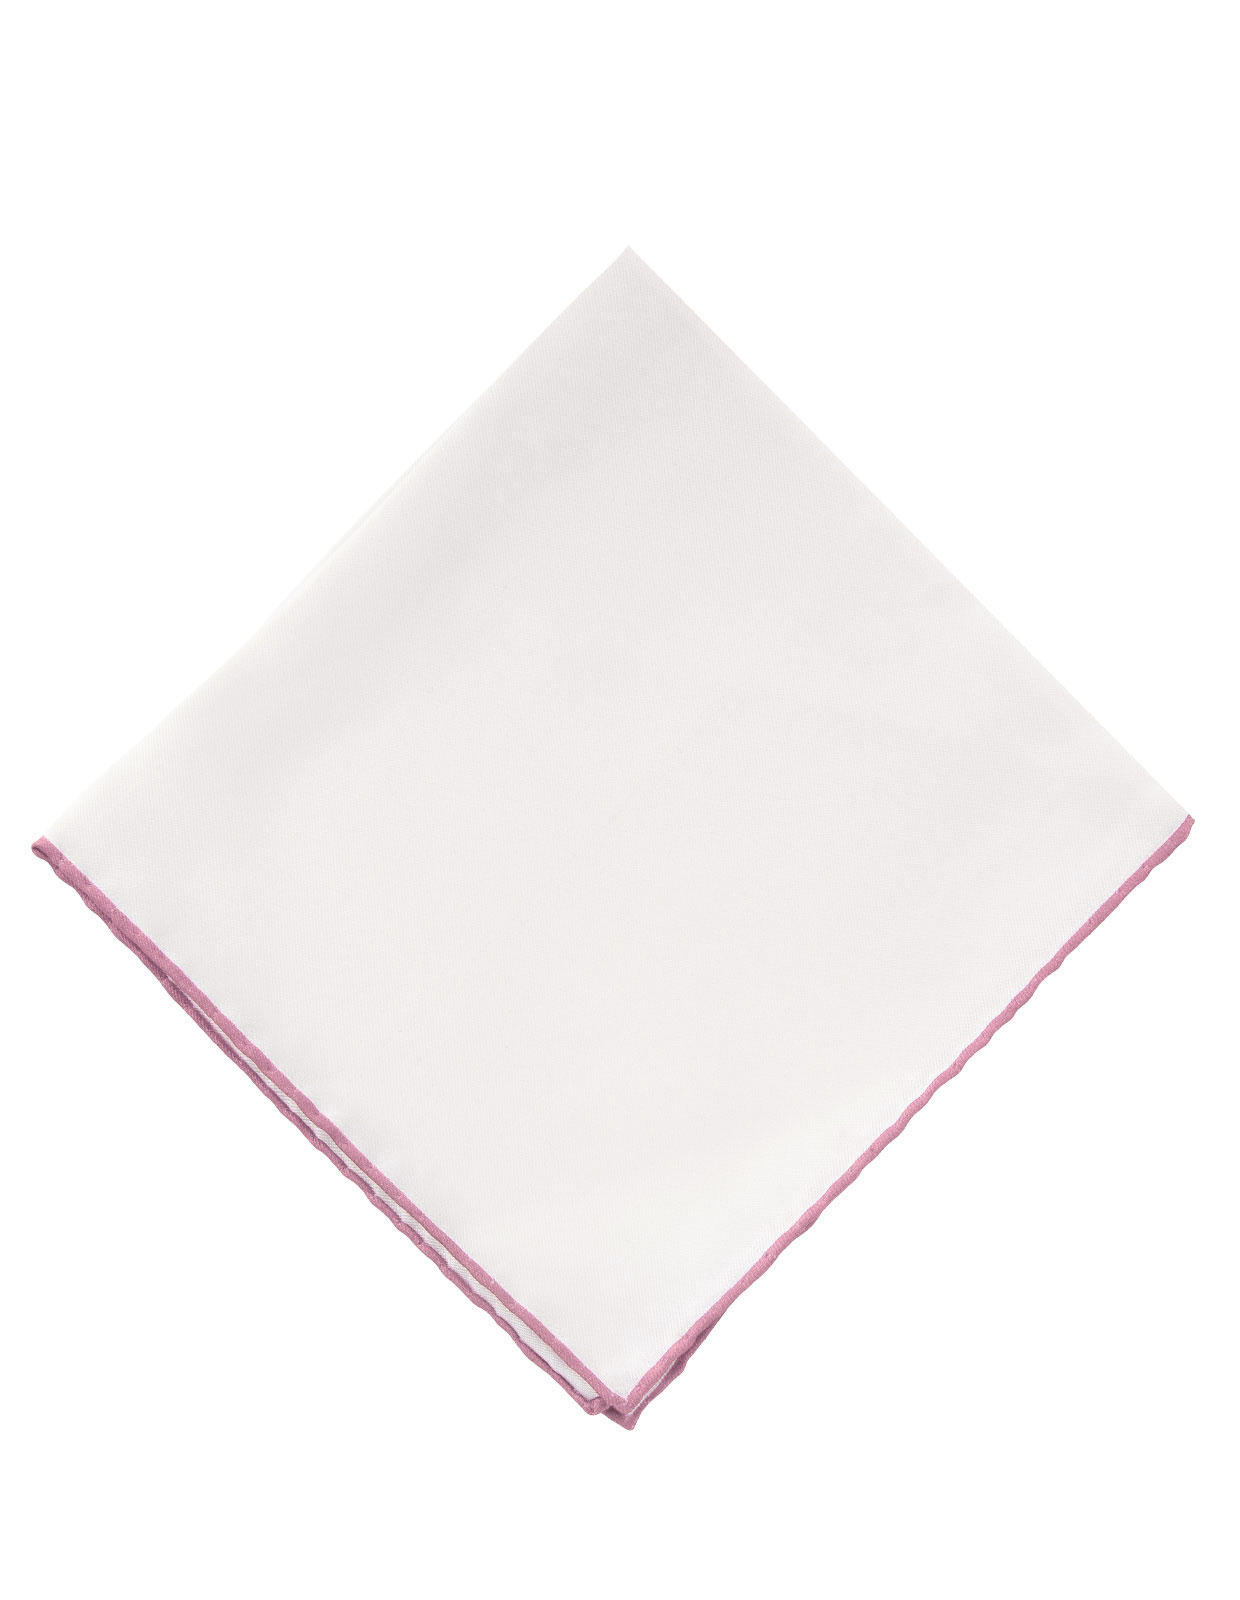 Pocket Square Silk Colored Edging White/Pink